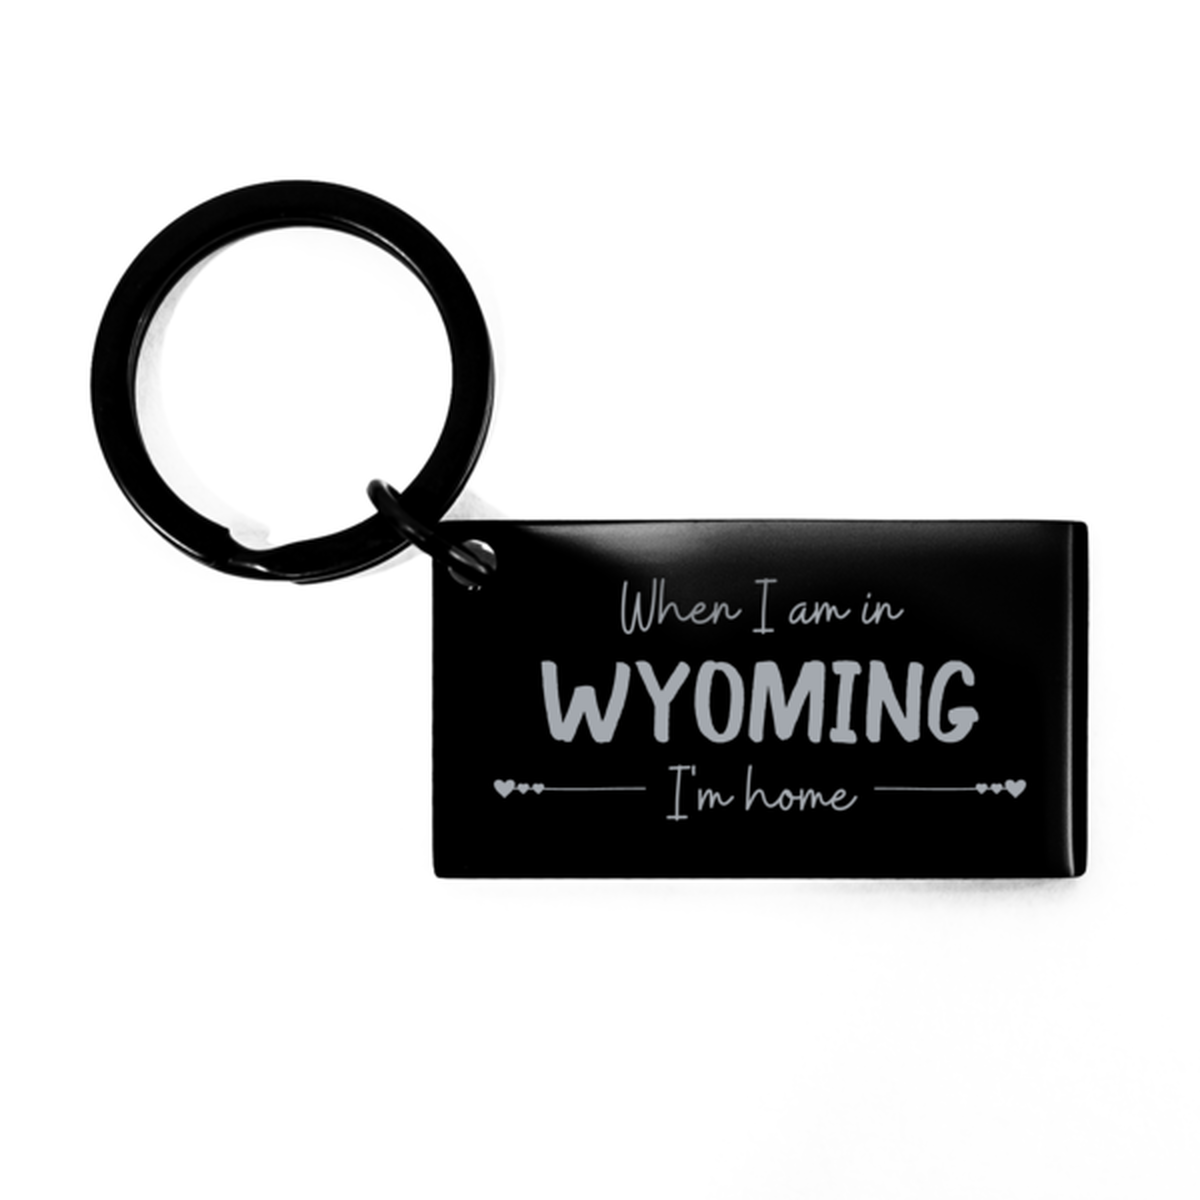 When I am in Wyoming I'm home Keychain, Cheap Gifts For Wyoming, State Wyoming Birthday Gifts for Friends Coworker